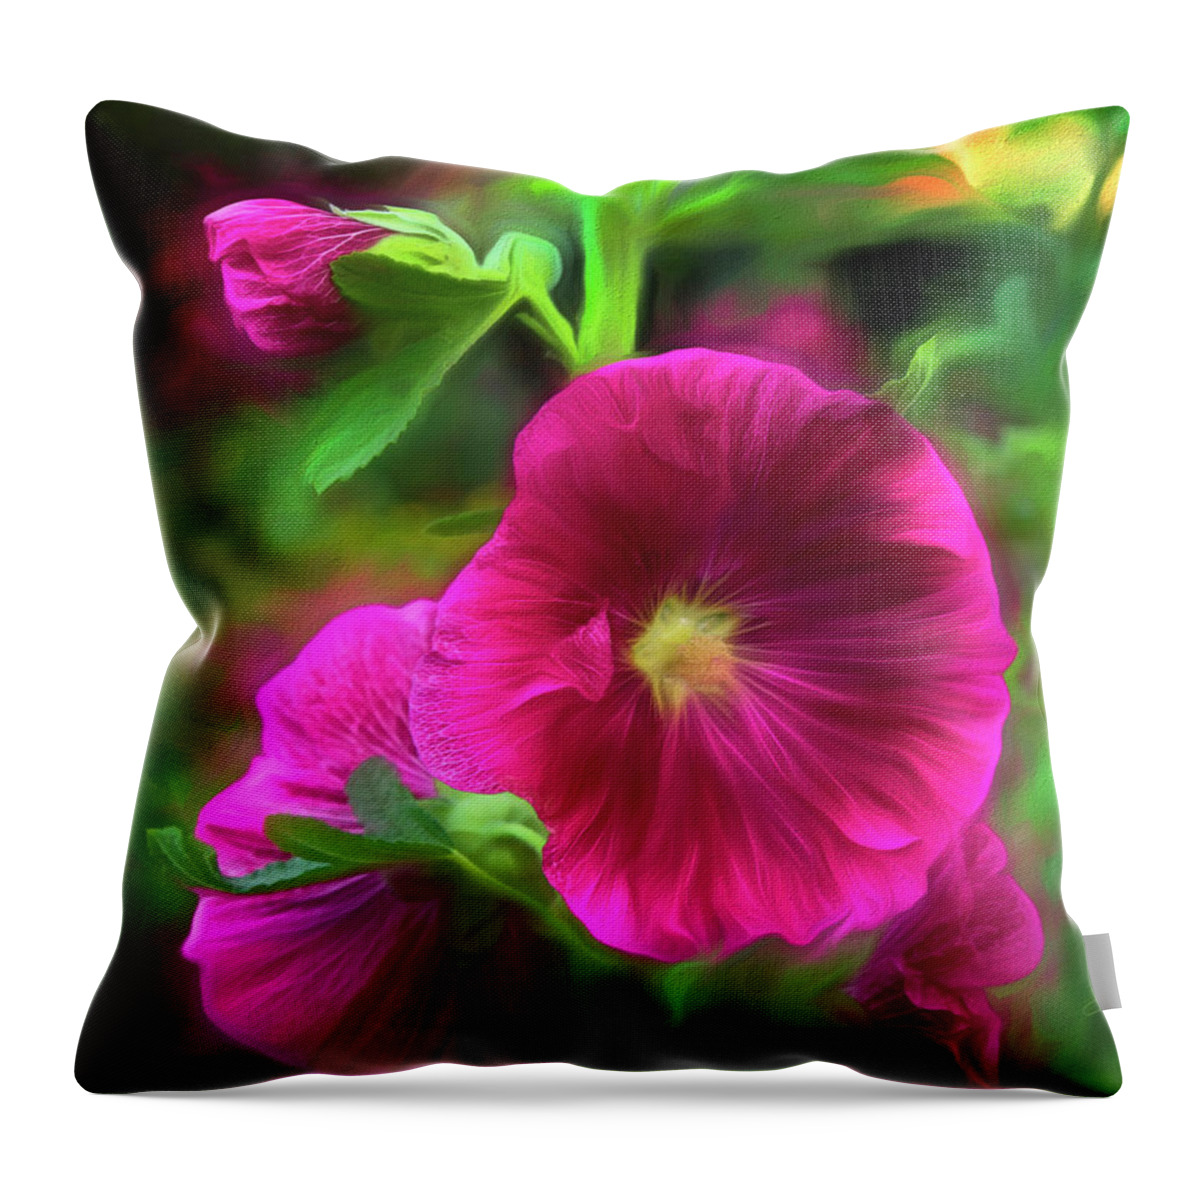 Flowers Throw Pillow featuring the photograph Hollyhocks by George Moore